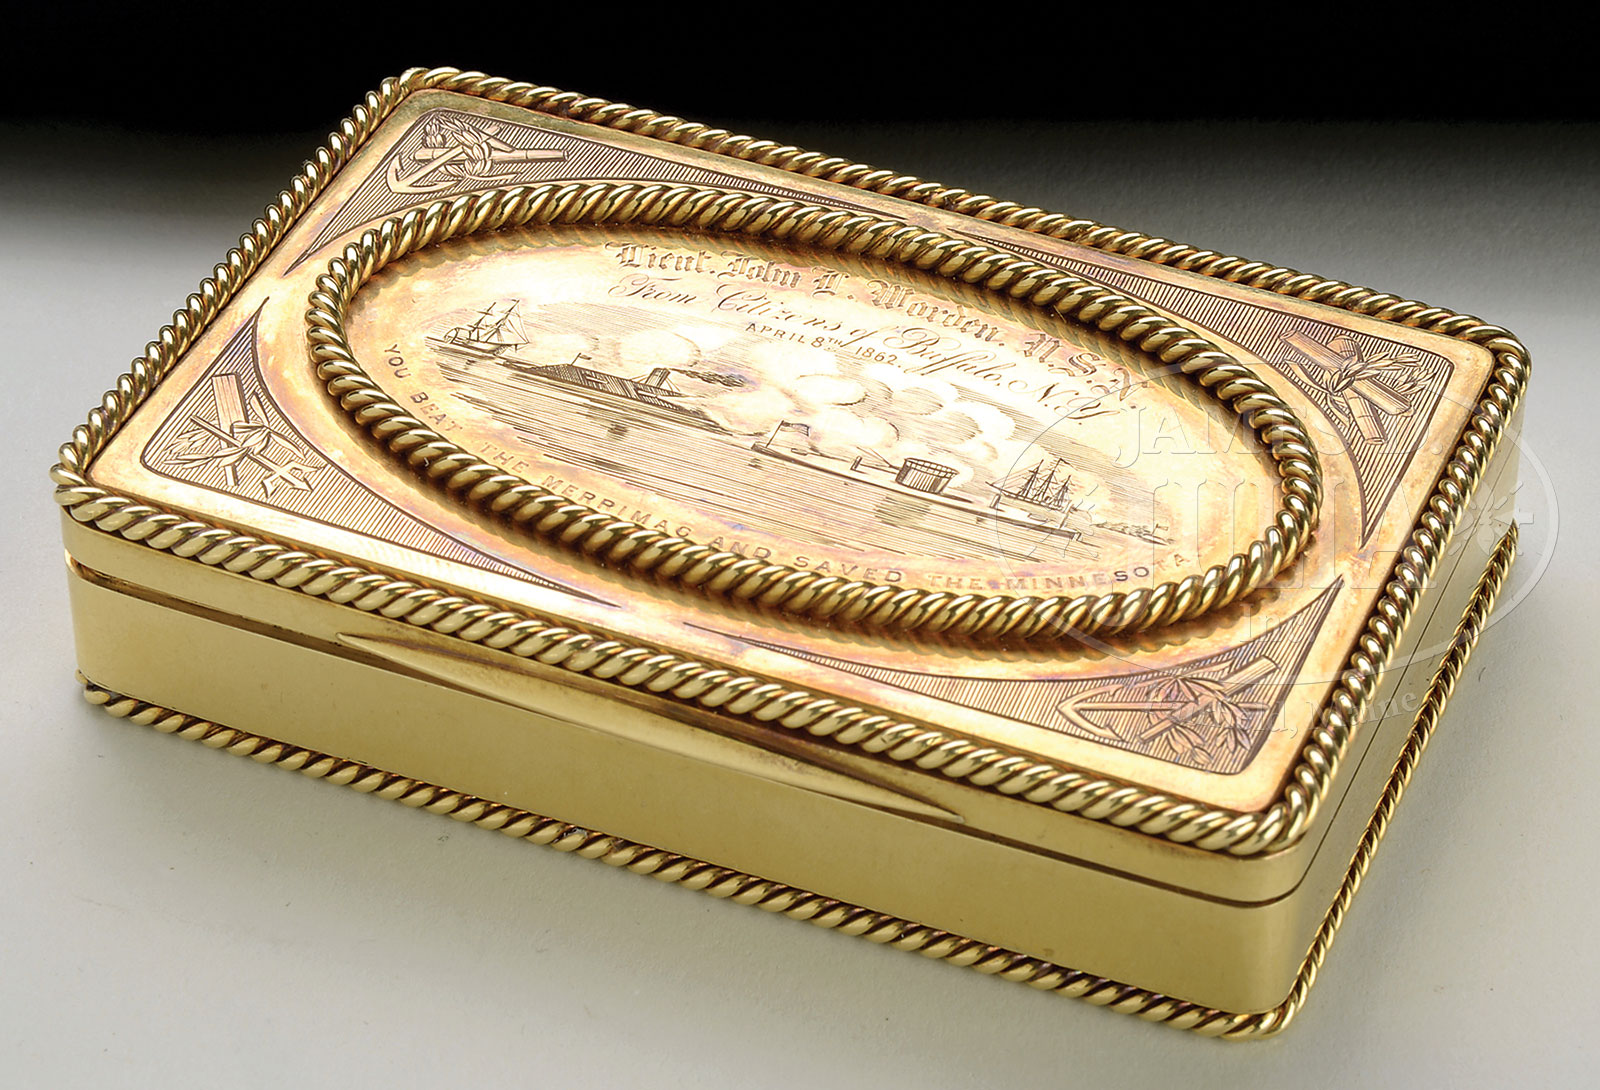 SOLID GOLD TIFFANY PRESENTATION SNUFF BOX PRESENTED BY THE CITIZENS OF BUFFALO TO LT. JOHN WORDEN, HERO OF THE VICTORY OF THE MONITOR OVER THE MERRIMAC